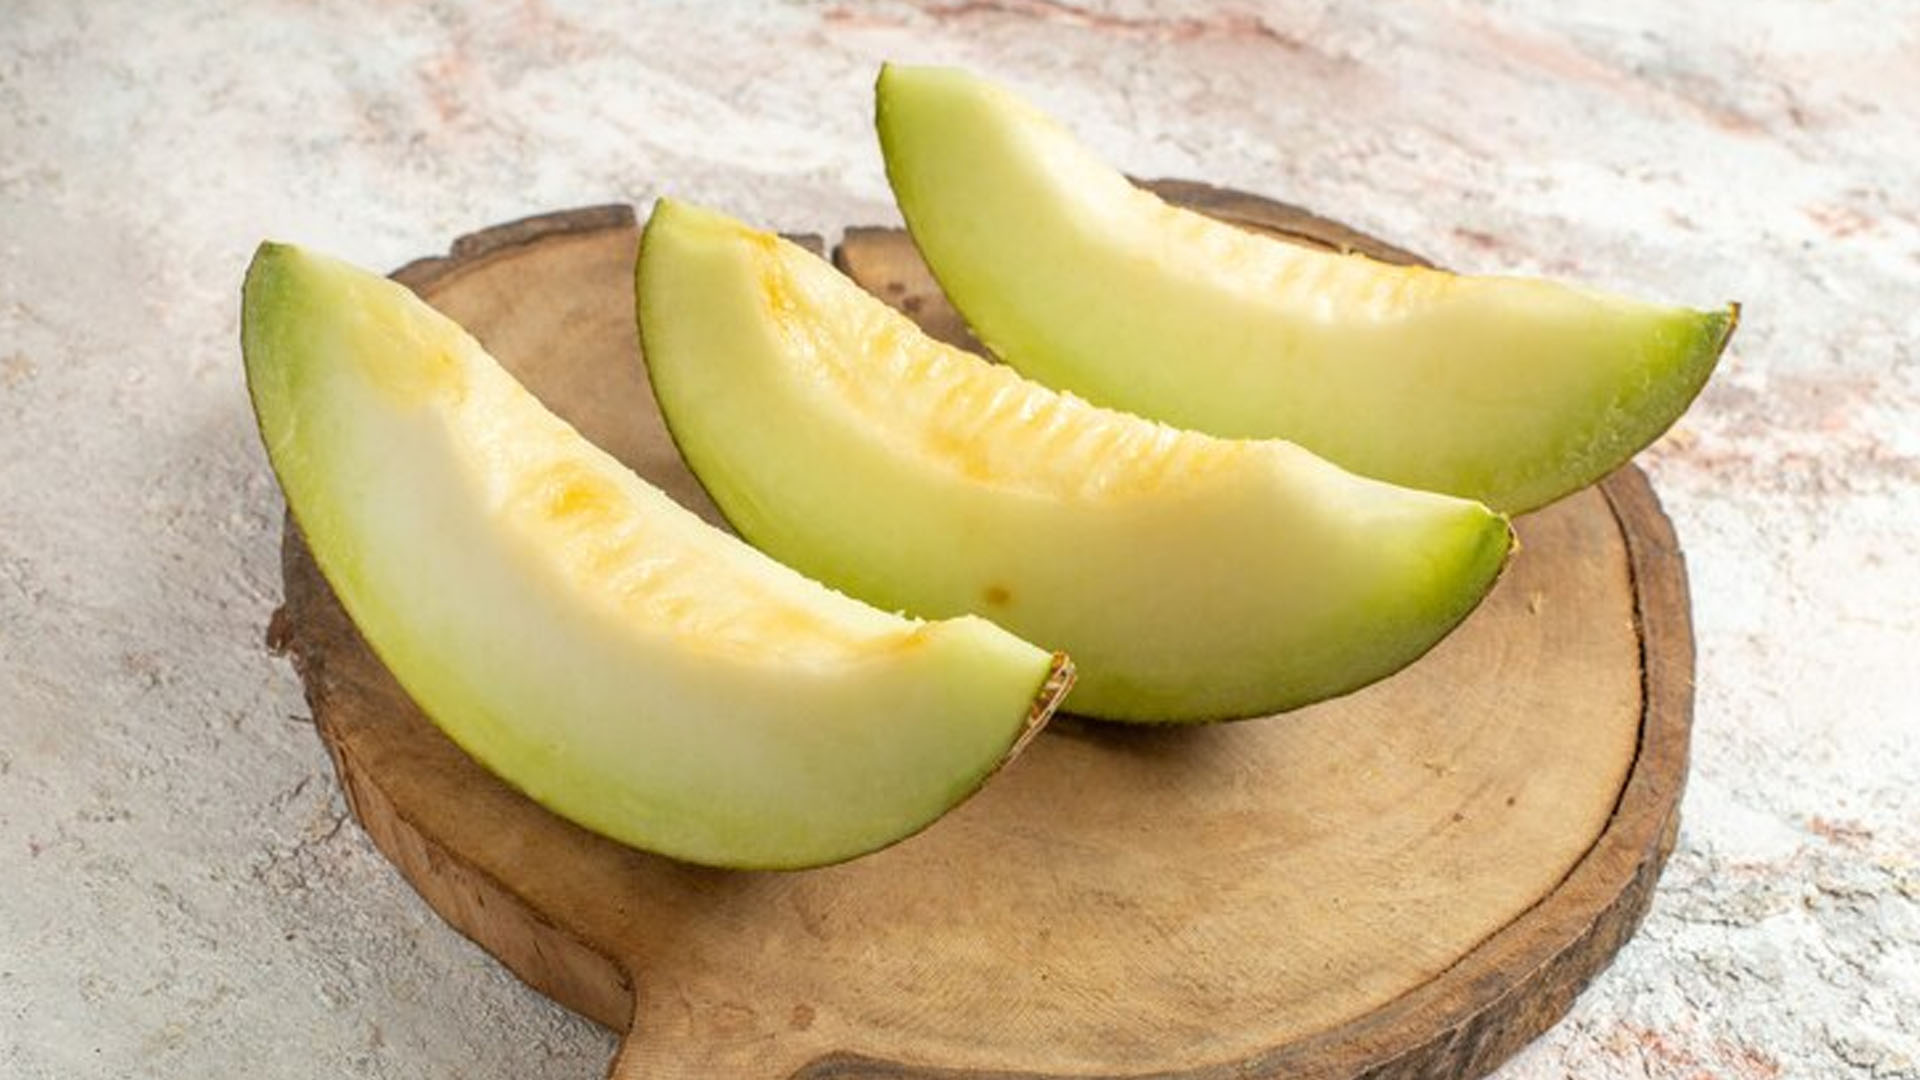 What are the Health Benefits of Honeydew Melon?